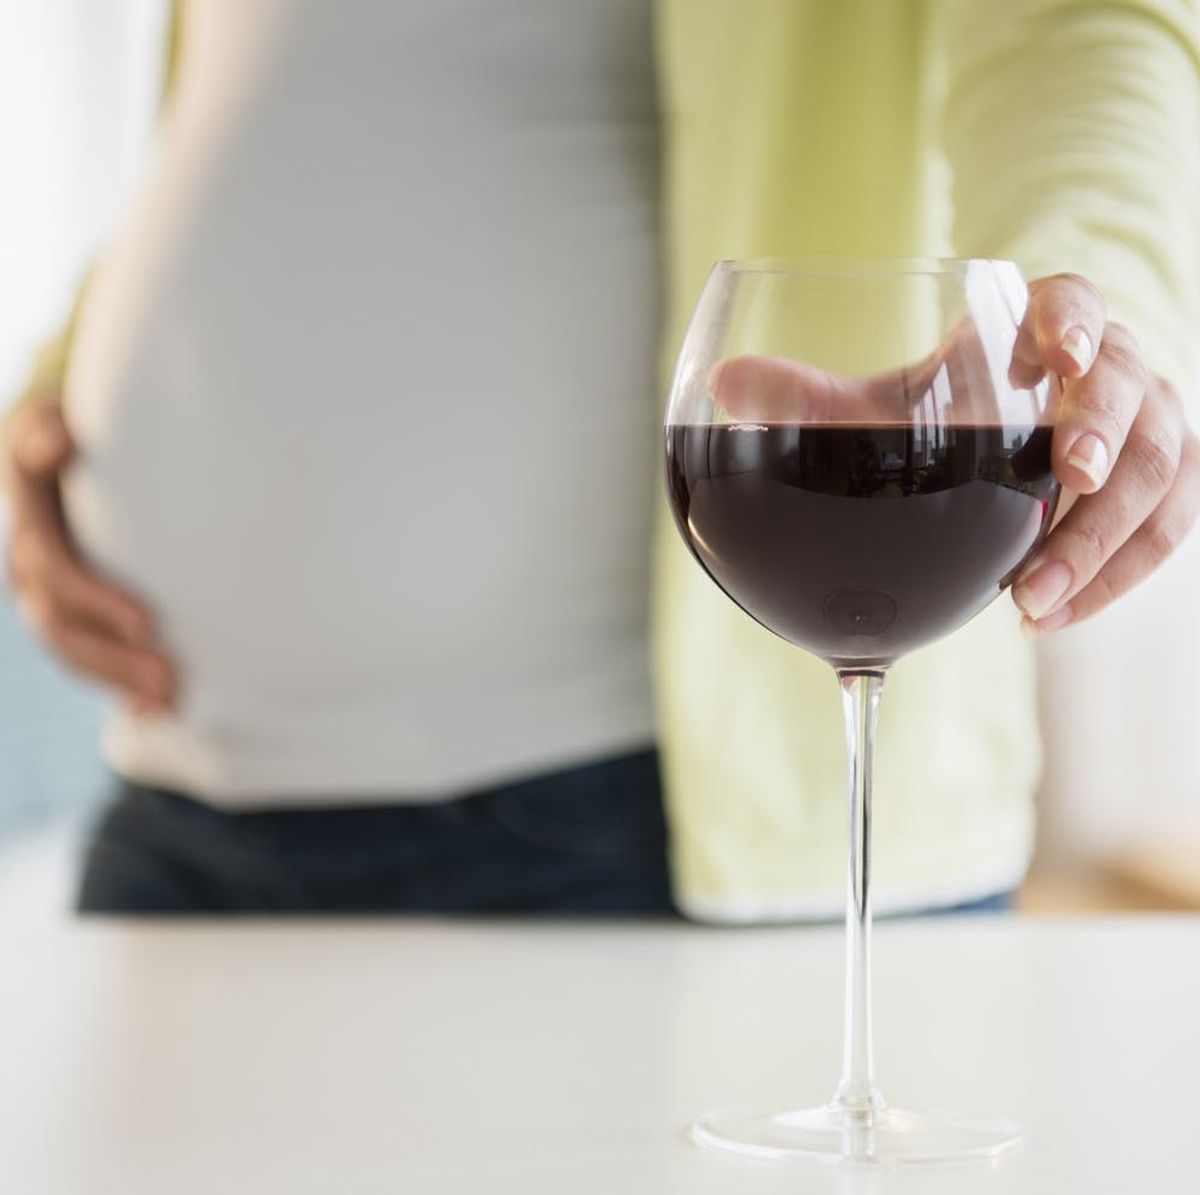 We Need to Chill About Moms Drinking During Pregnancy — or Do We?